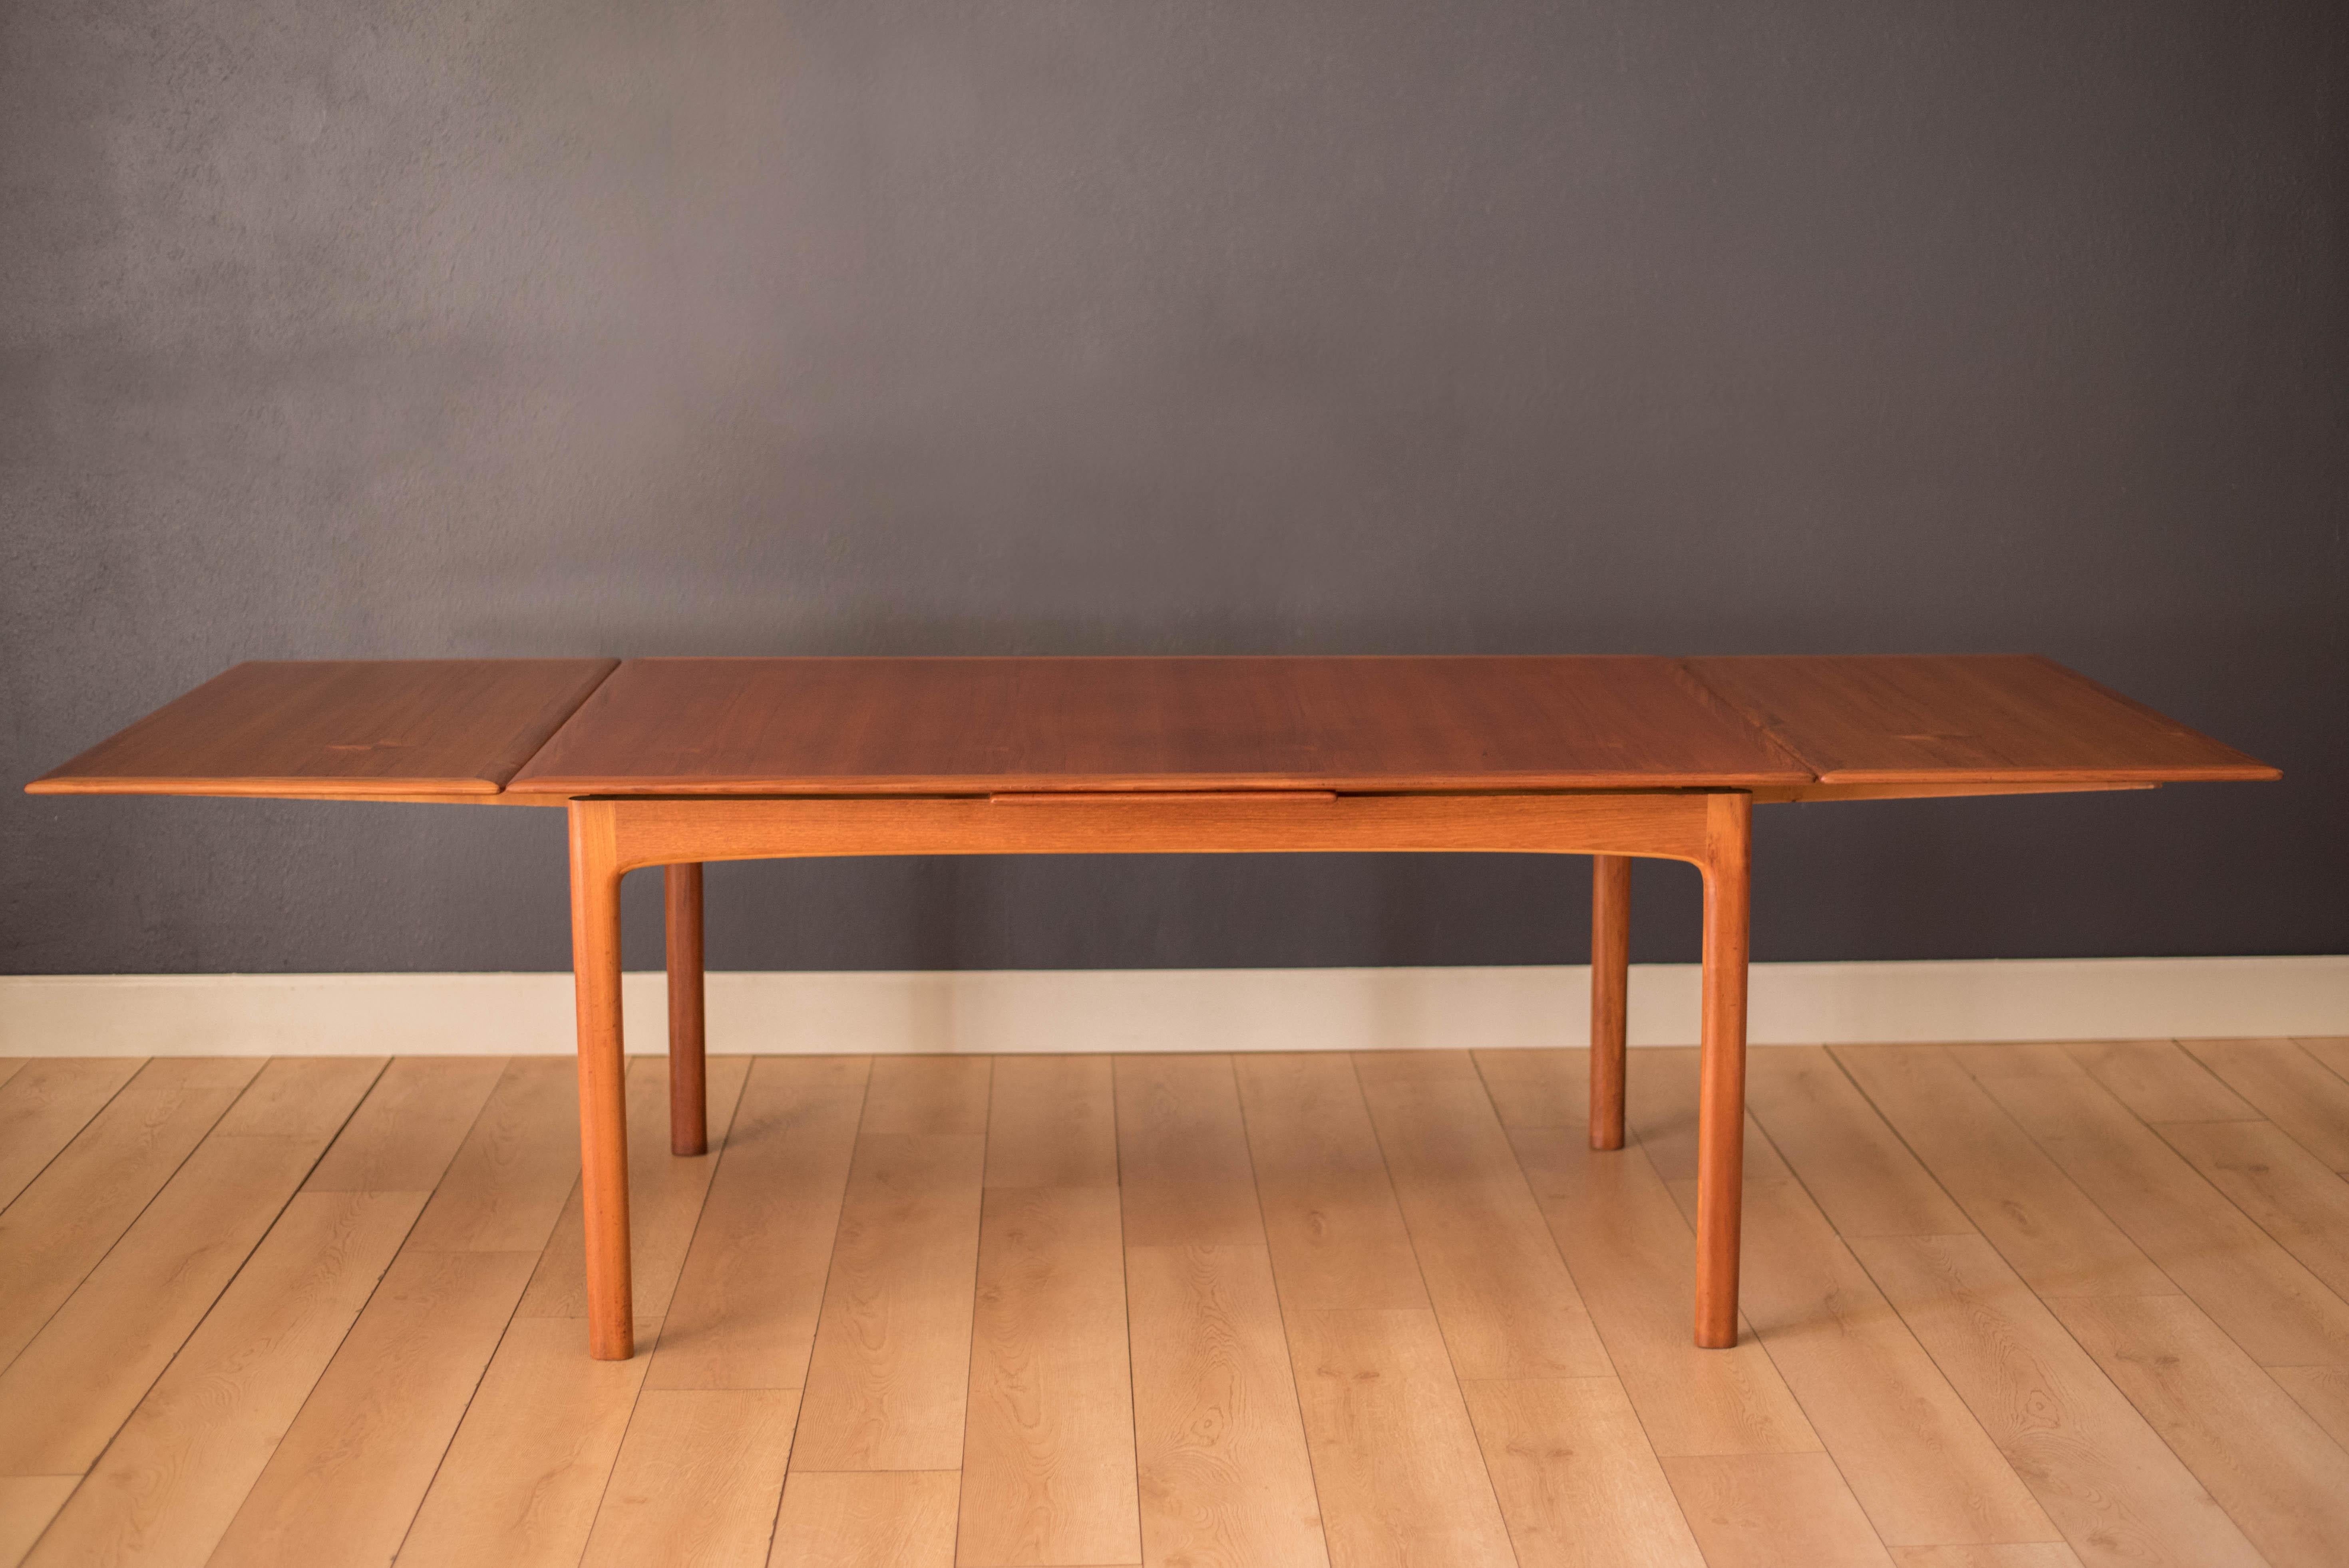 Mid century modern expandable dining table in teak designed by Folke Ohlsson for DUX, Sweden. This versatile piece includes two draw leaf extensions that cleverly store underneath the table. Features a vertical teak grain pattern framed with wide